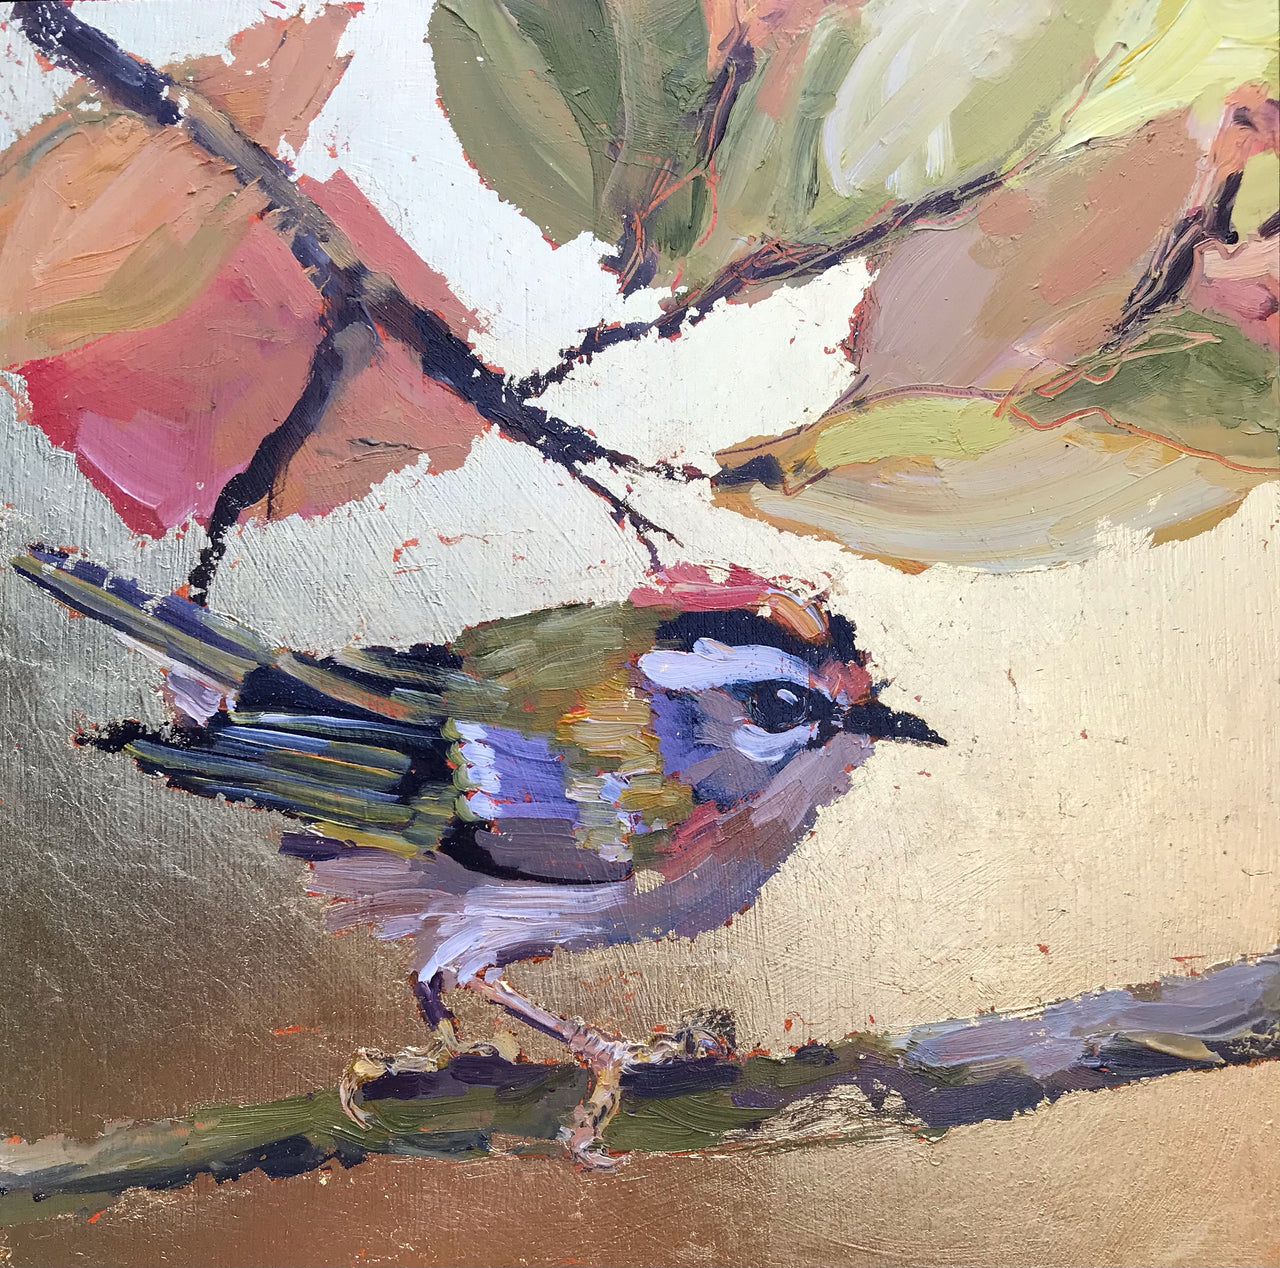 painting by artist Jill Hudson, gold square background with firecrest on branch and brown & green leaves.